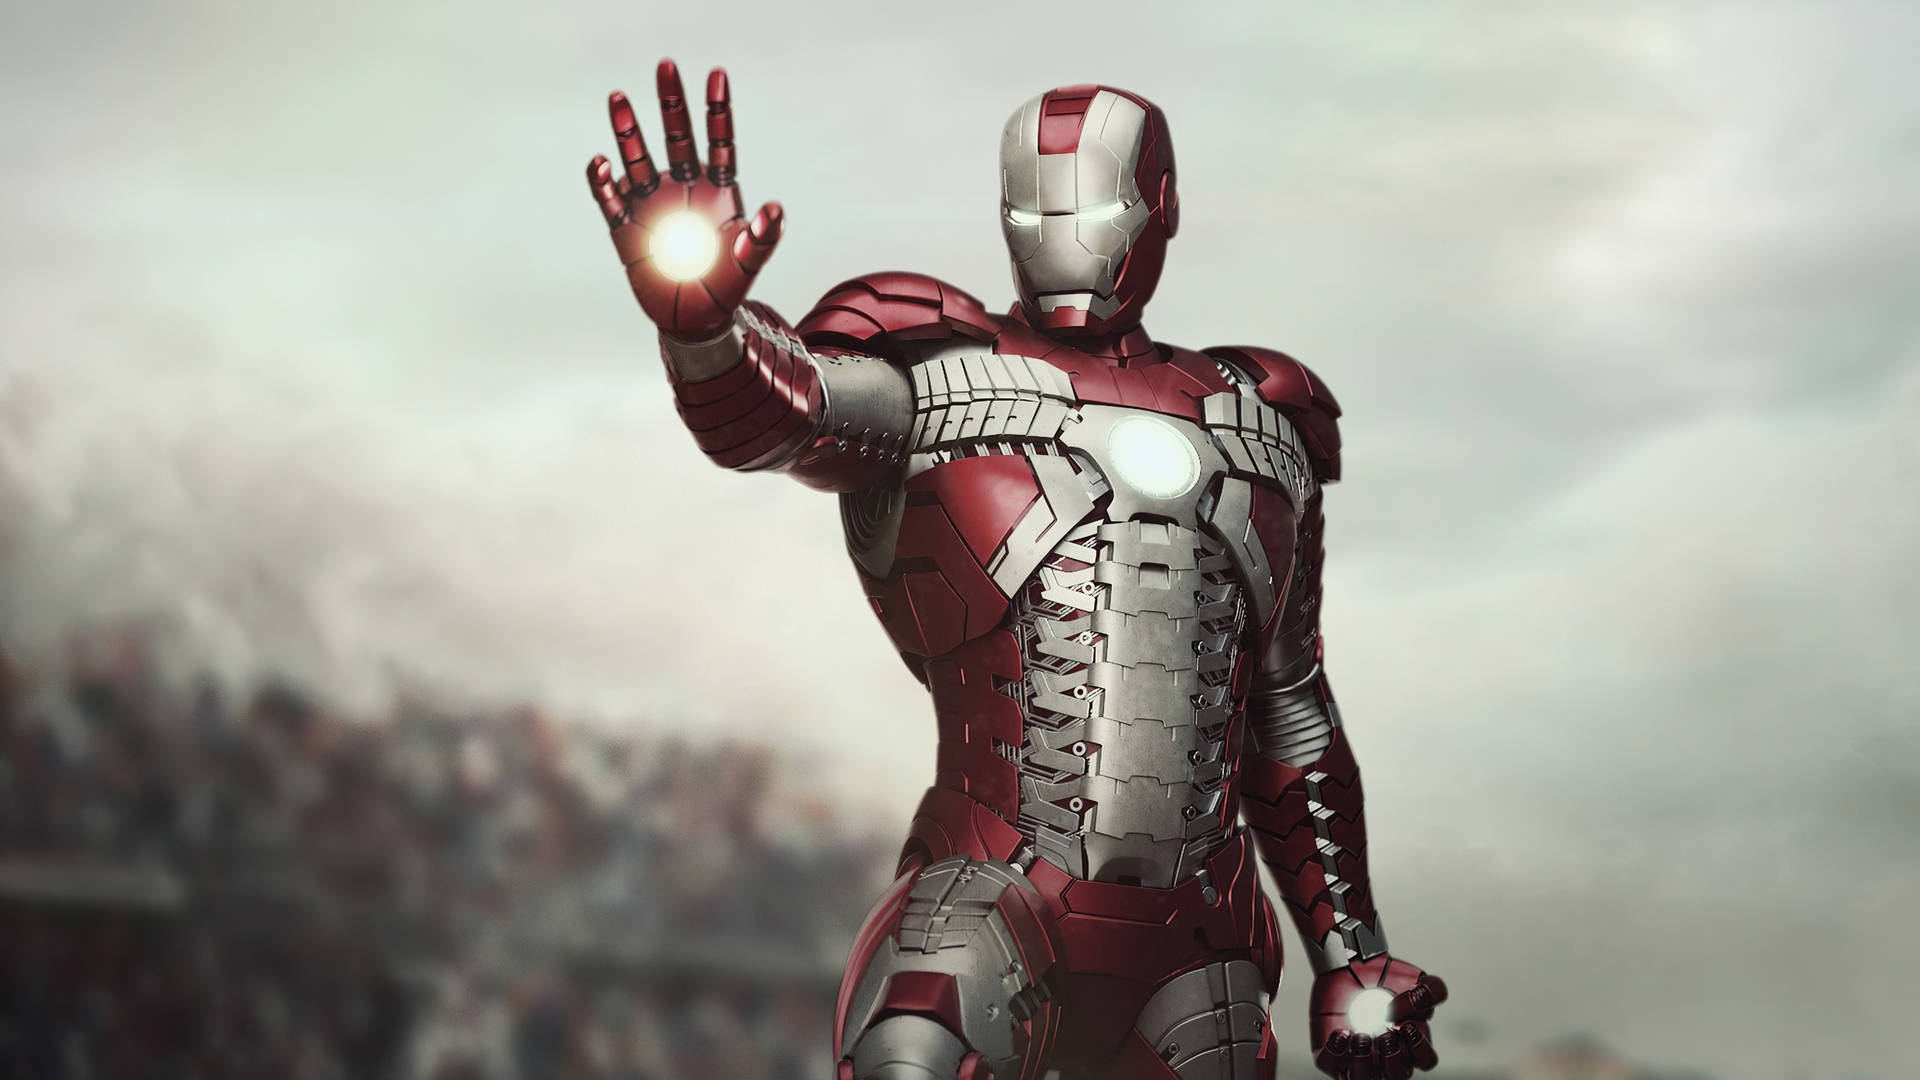 Download Cool Iron Man Red Silver Suit Wallpaper | Wallpapers.Com